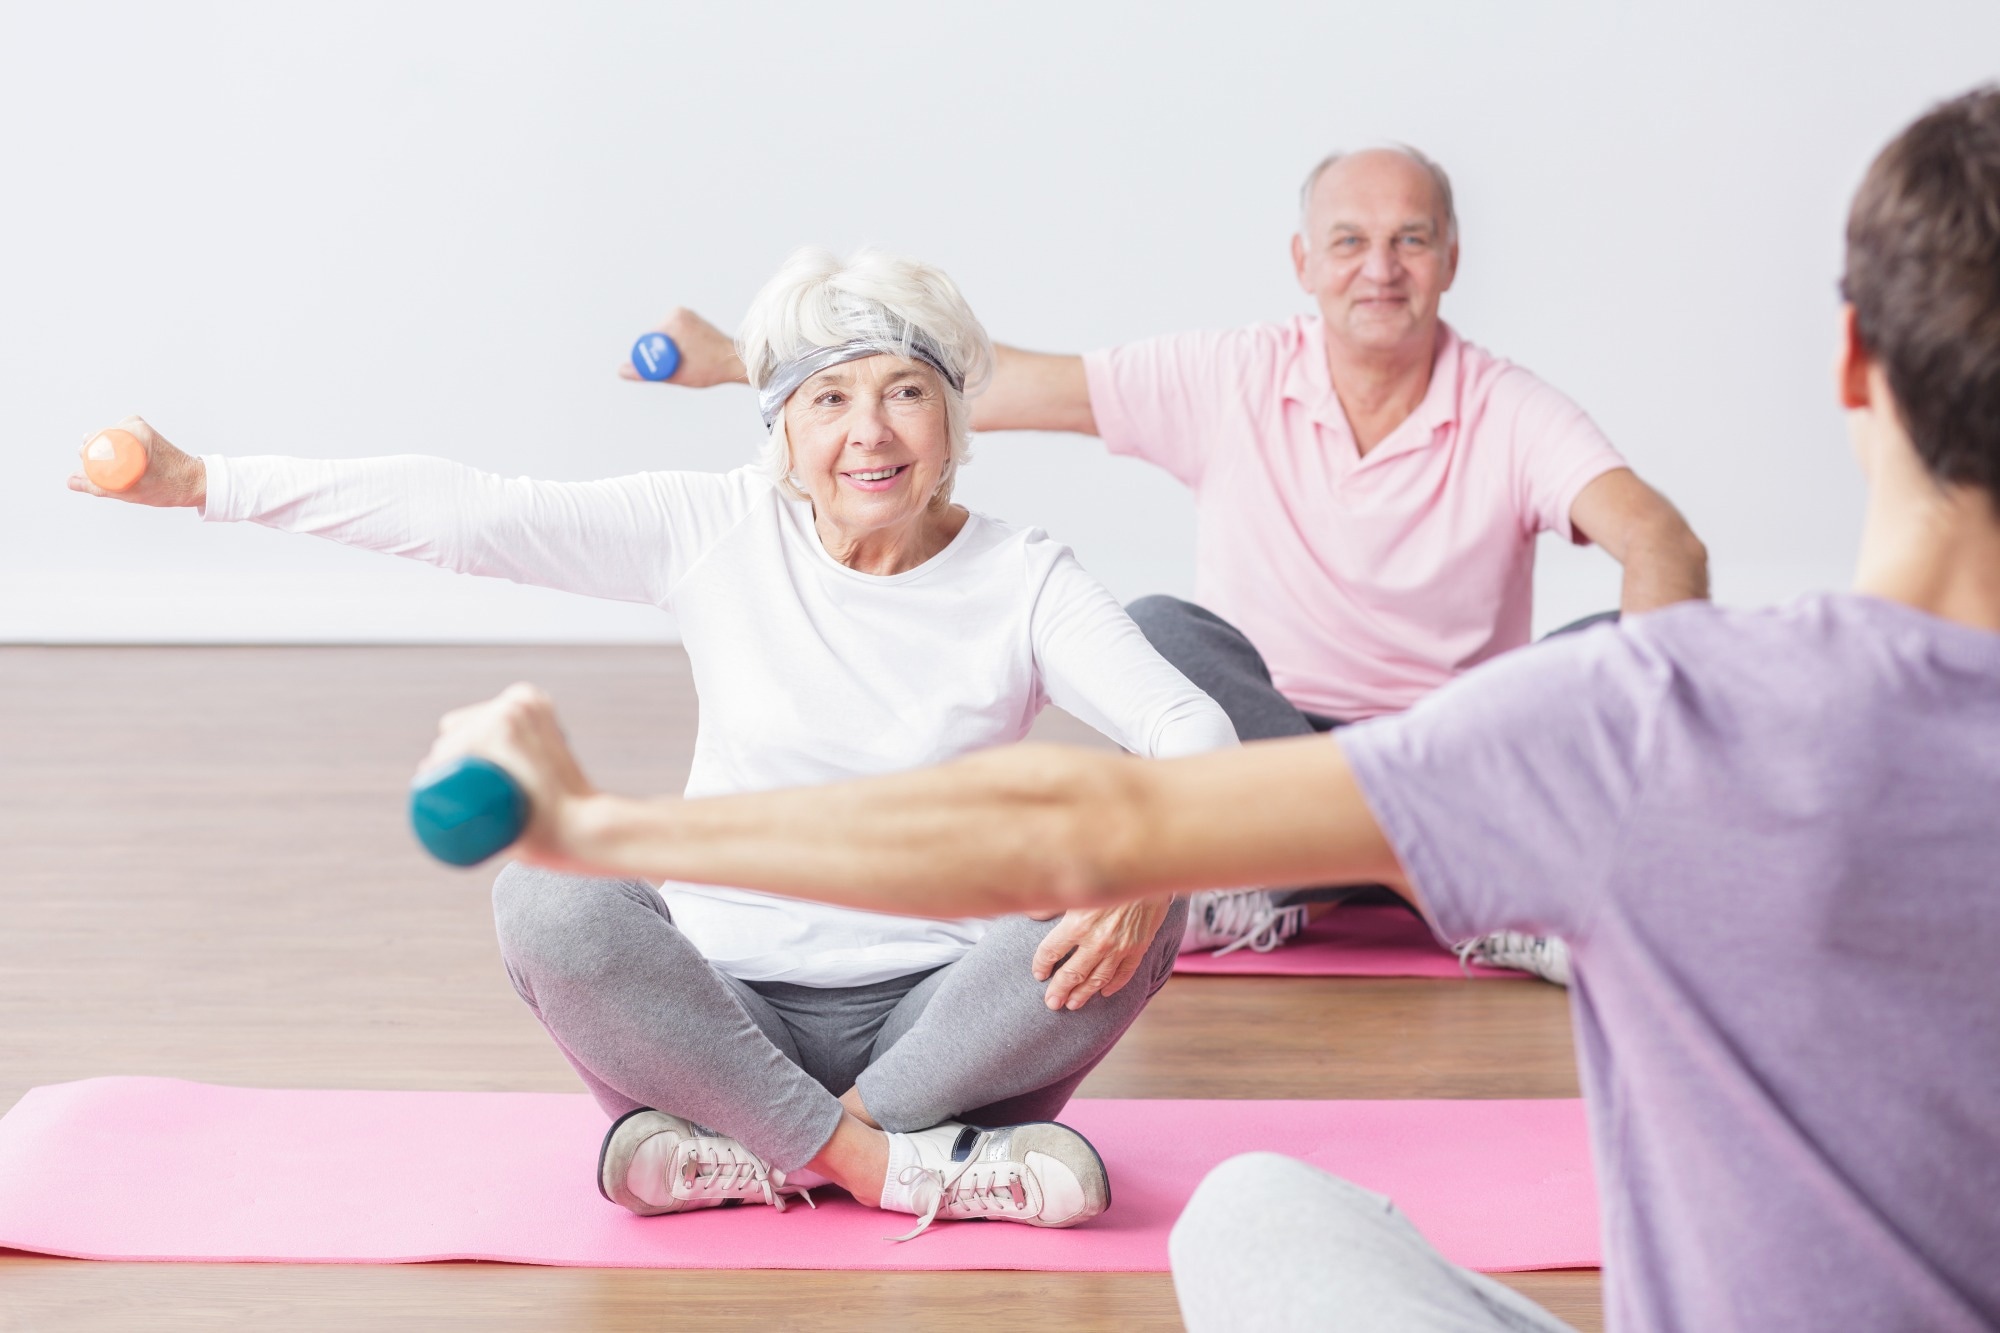 Study: Minimal amount of exercise prevents incident dementia in cognitively normal older adults with osteoarthritis: a retrospective longitudinal follow-up study. Image Credit: Ground Picture/Shutterstock.com